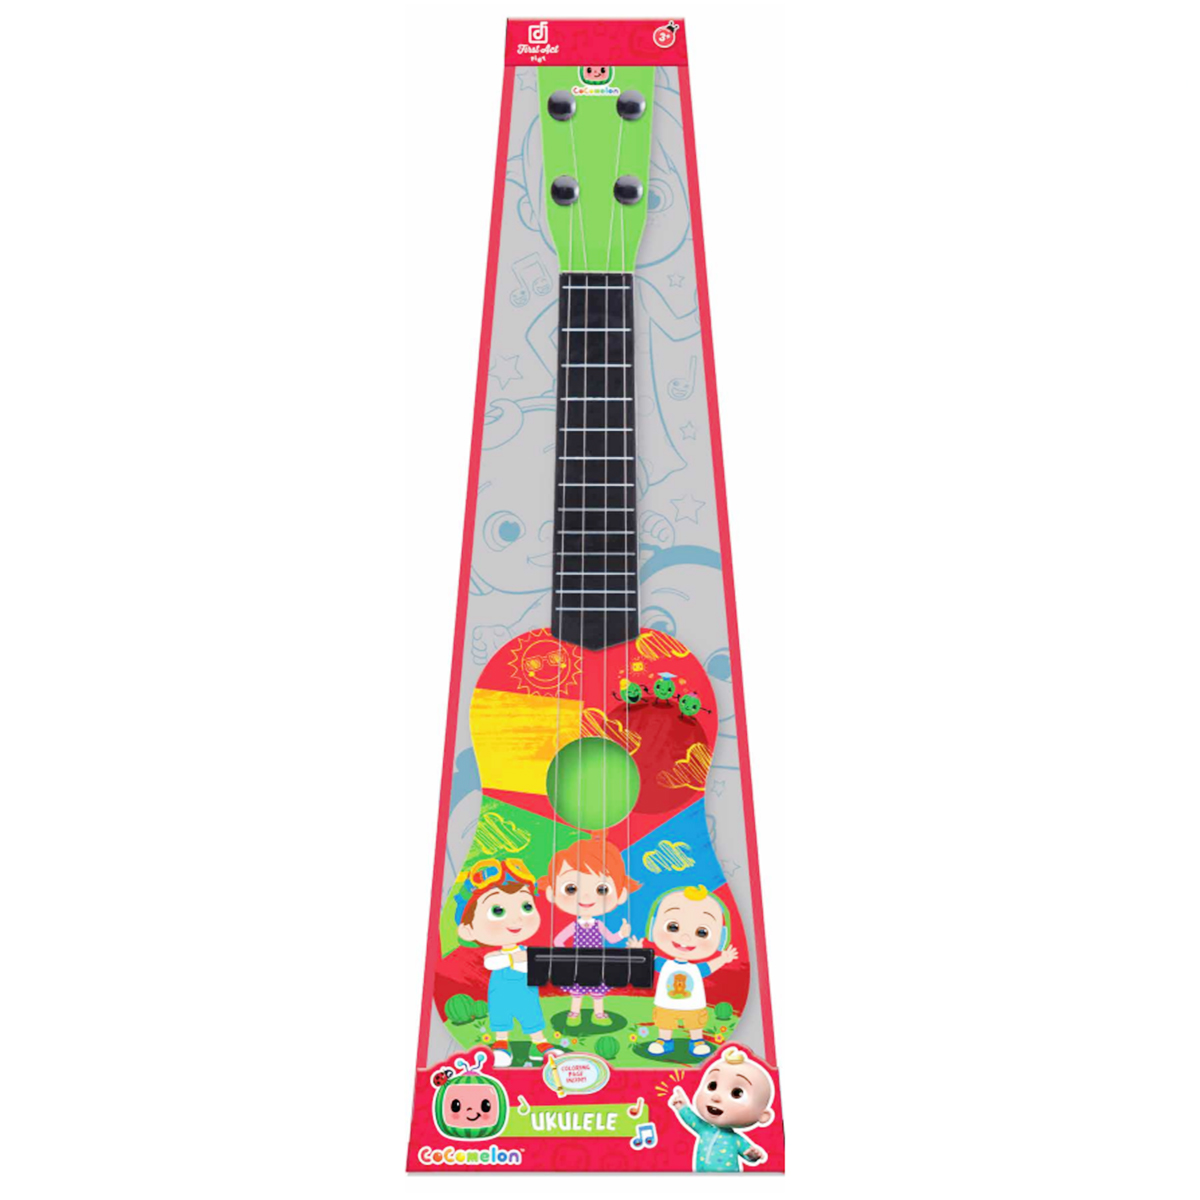 Ukulele Cocomelon, First Act, 40 cm, S2